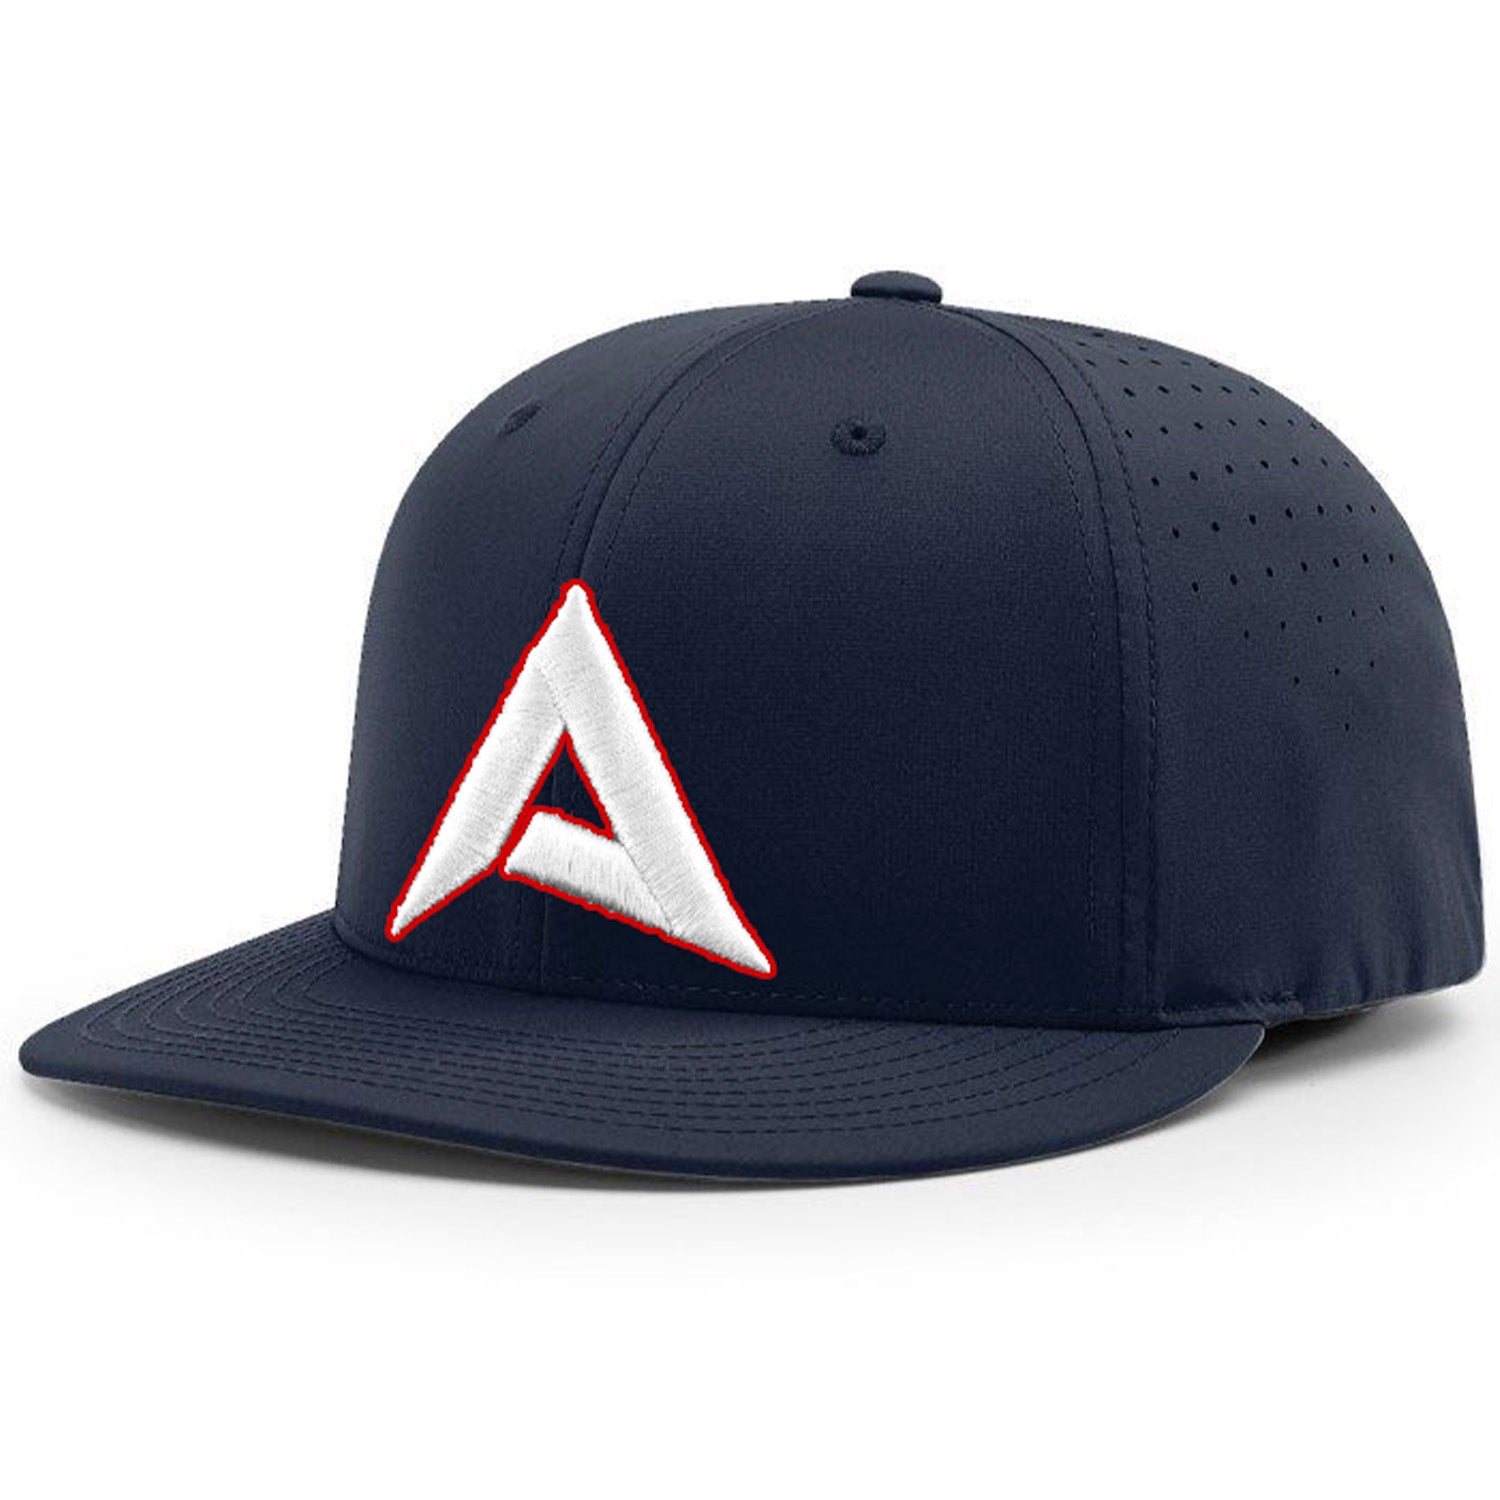 Anarchy PTS30 Performance Hat - New Logo - Navy/White/Red